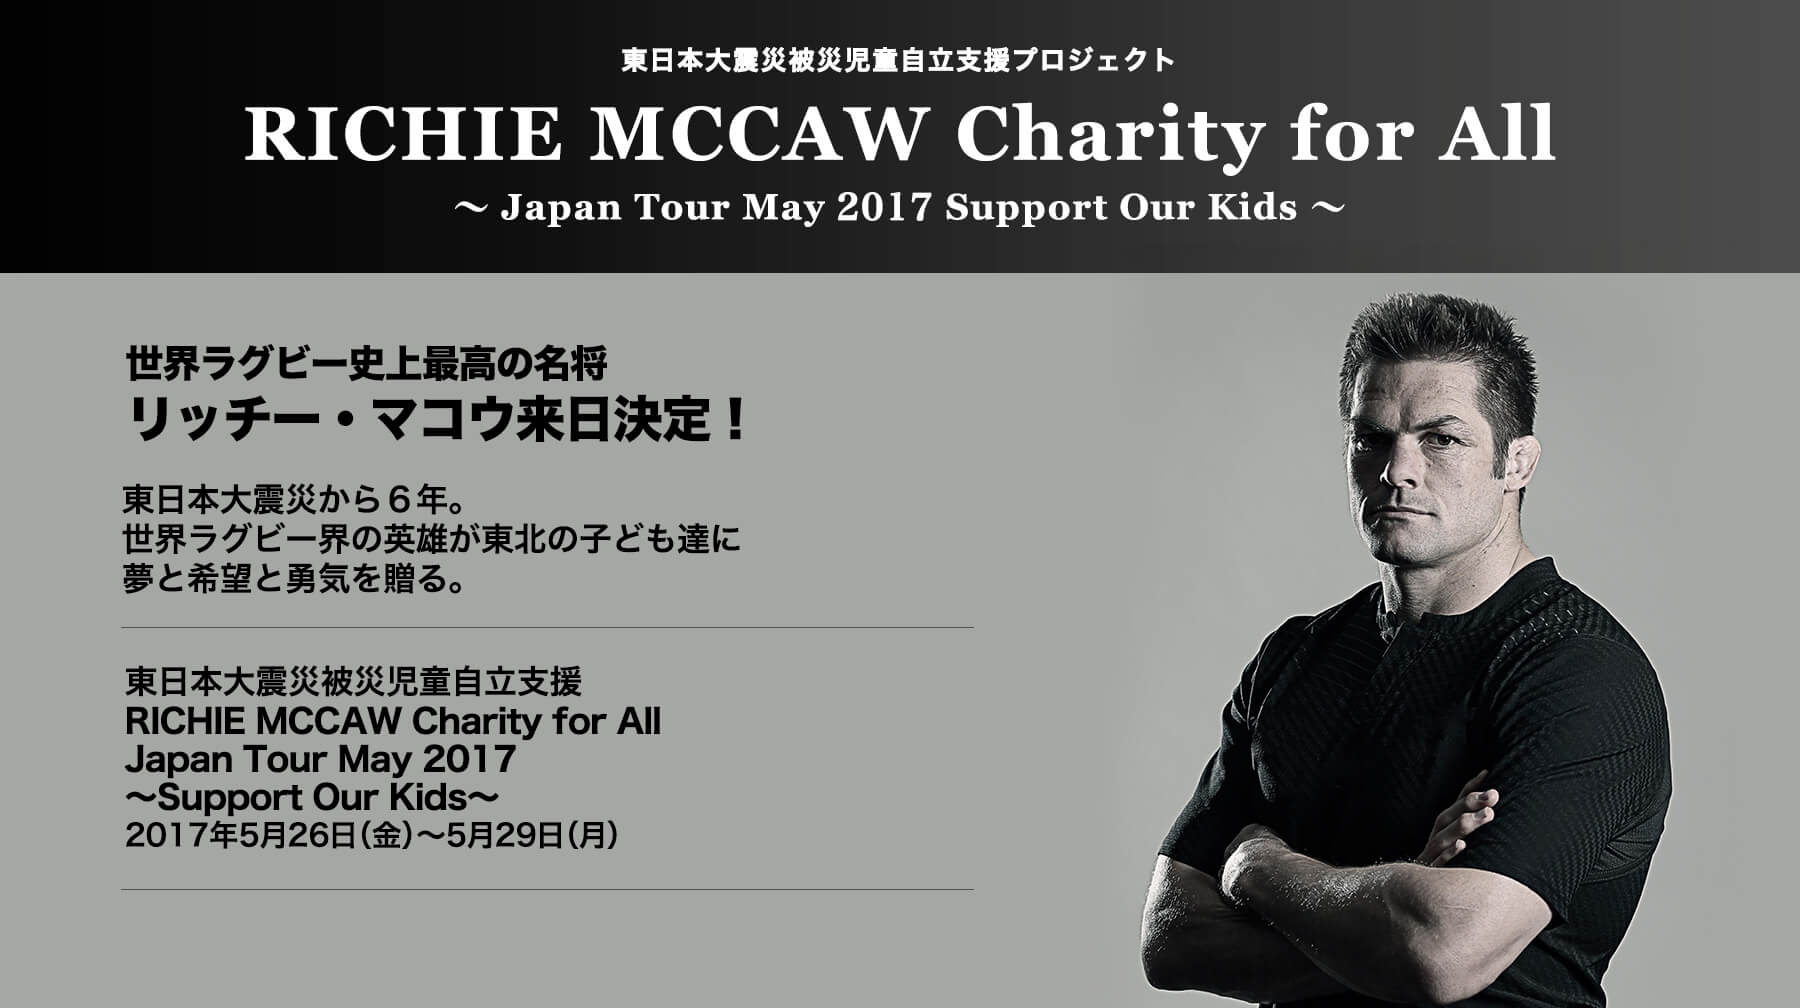 RICHIE MCCAW Charity for All